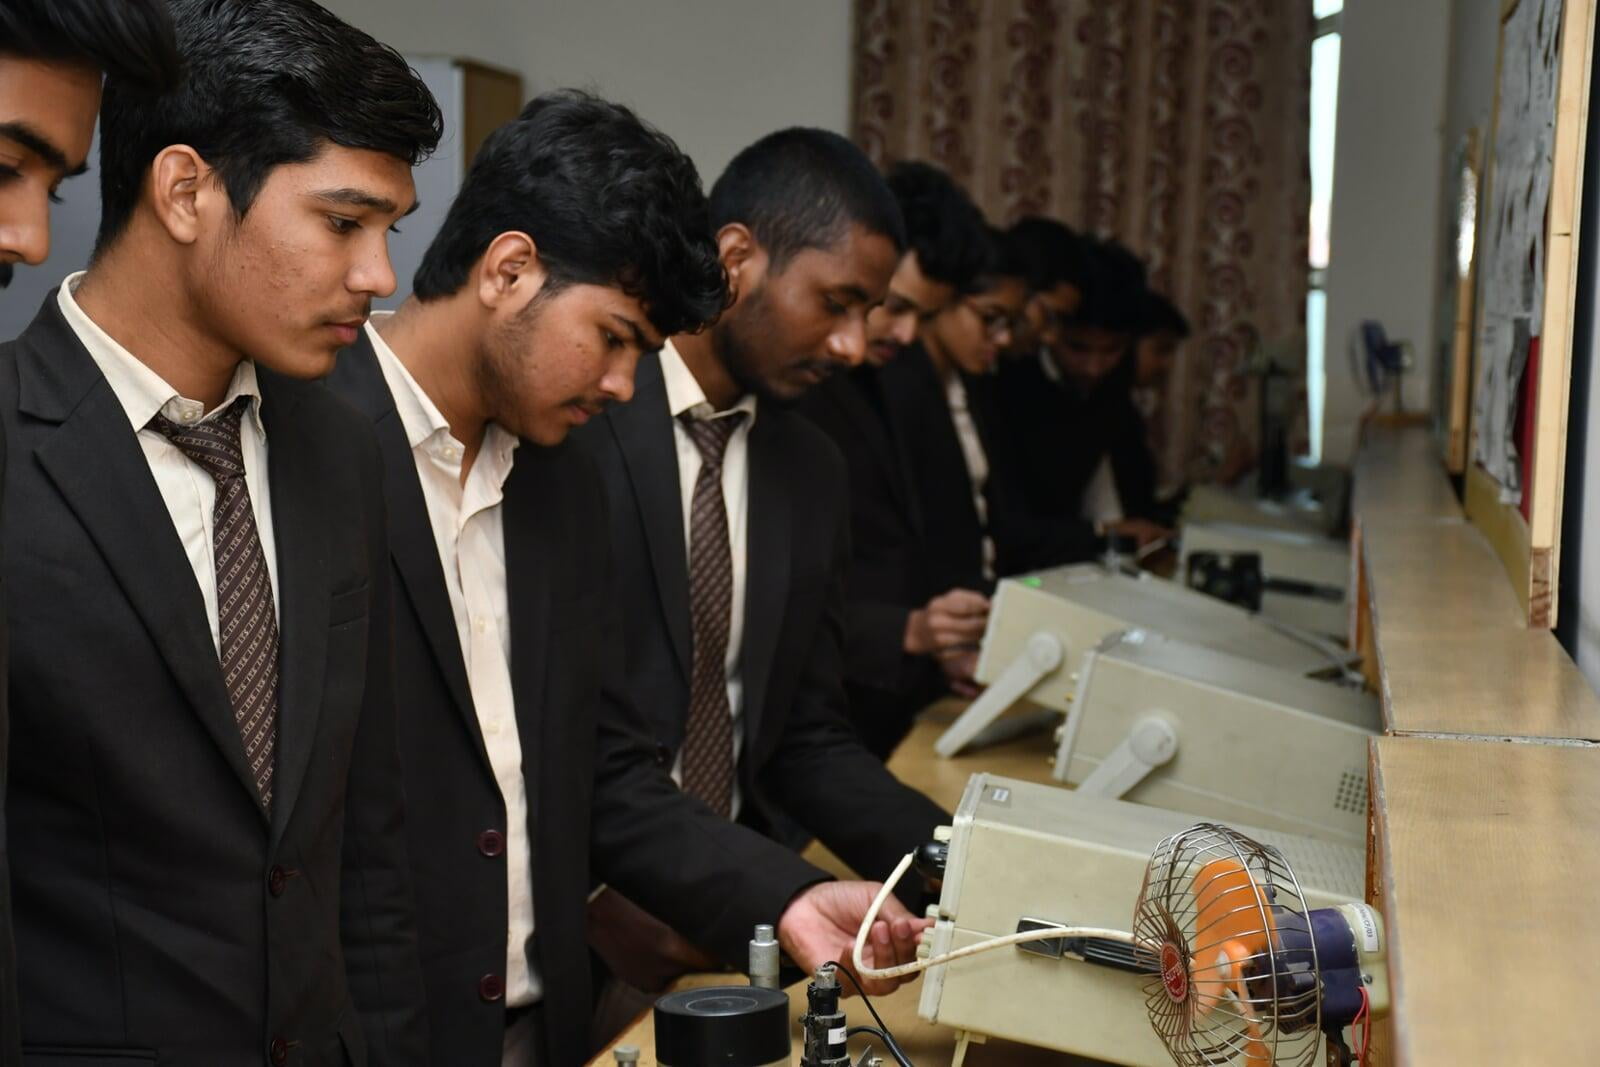 Electronics Workshop and PCB Lab at ITS